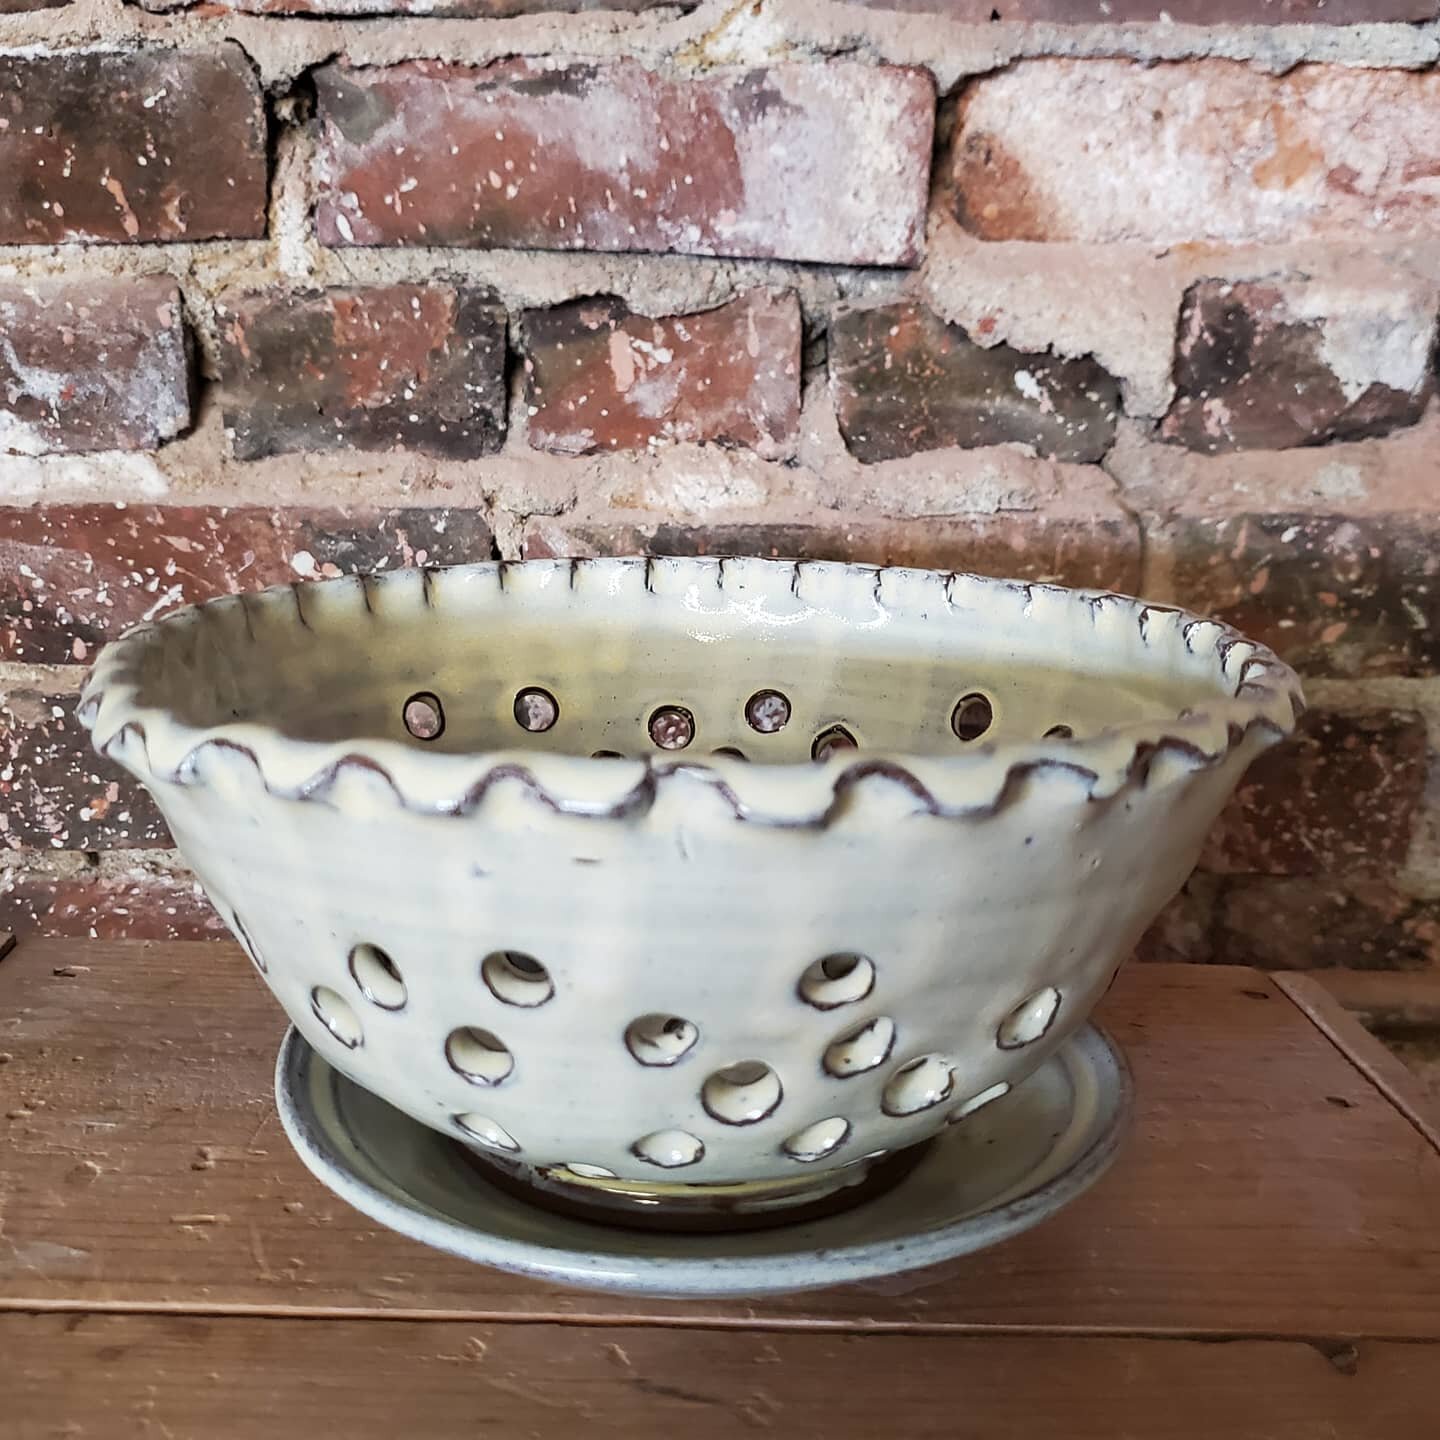 Berry Bowls are up and coming

#madeinvermont
#pottery
#haroldkaplanpottery